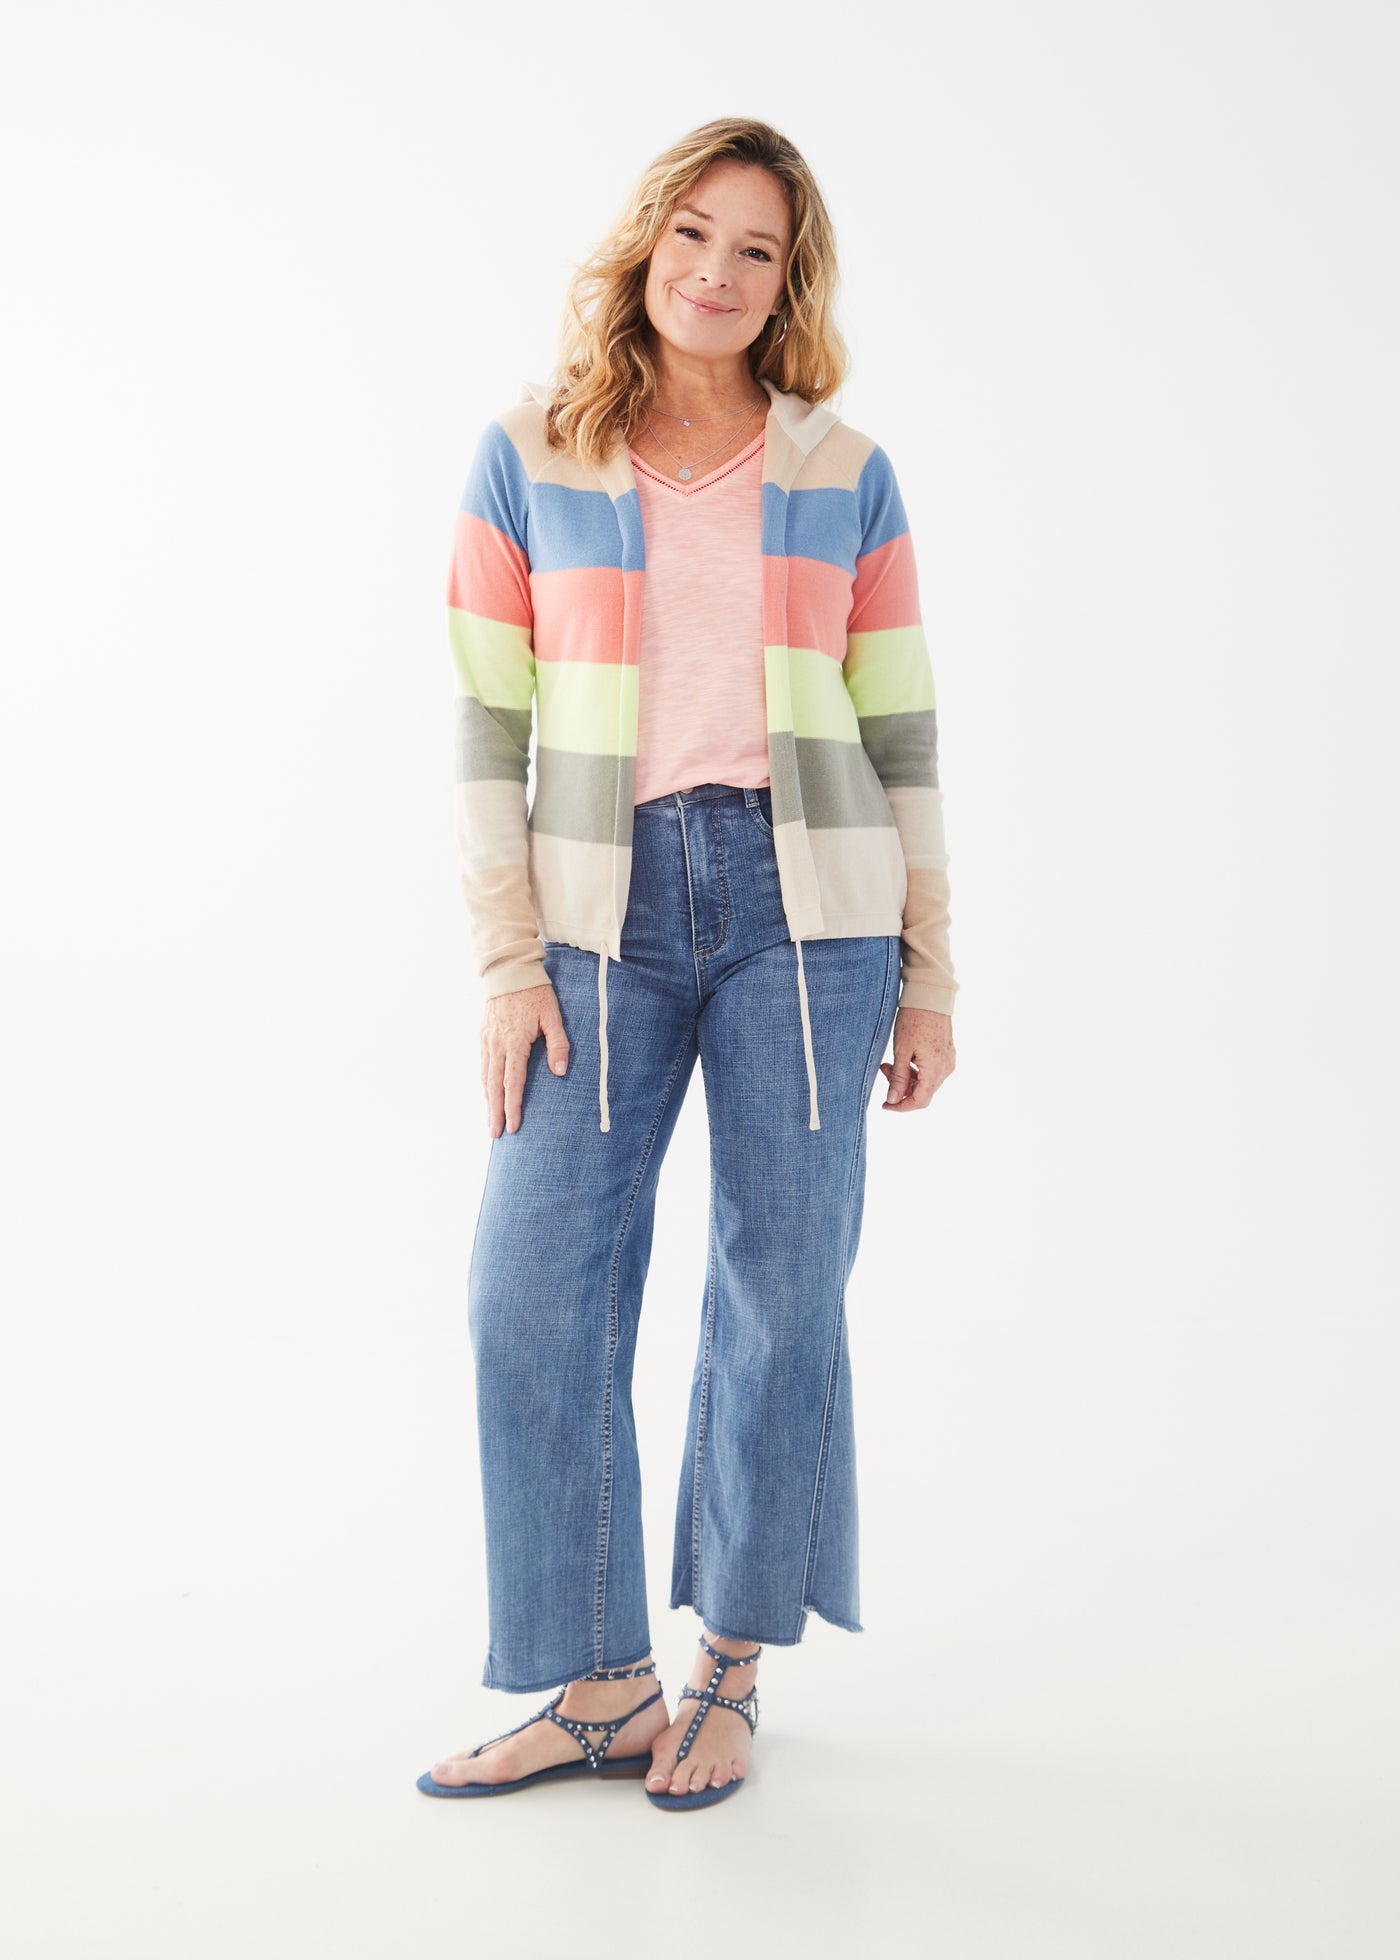 French Dressing Jeans Striped Hooded Cardigan 